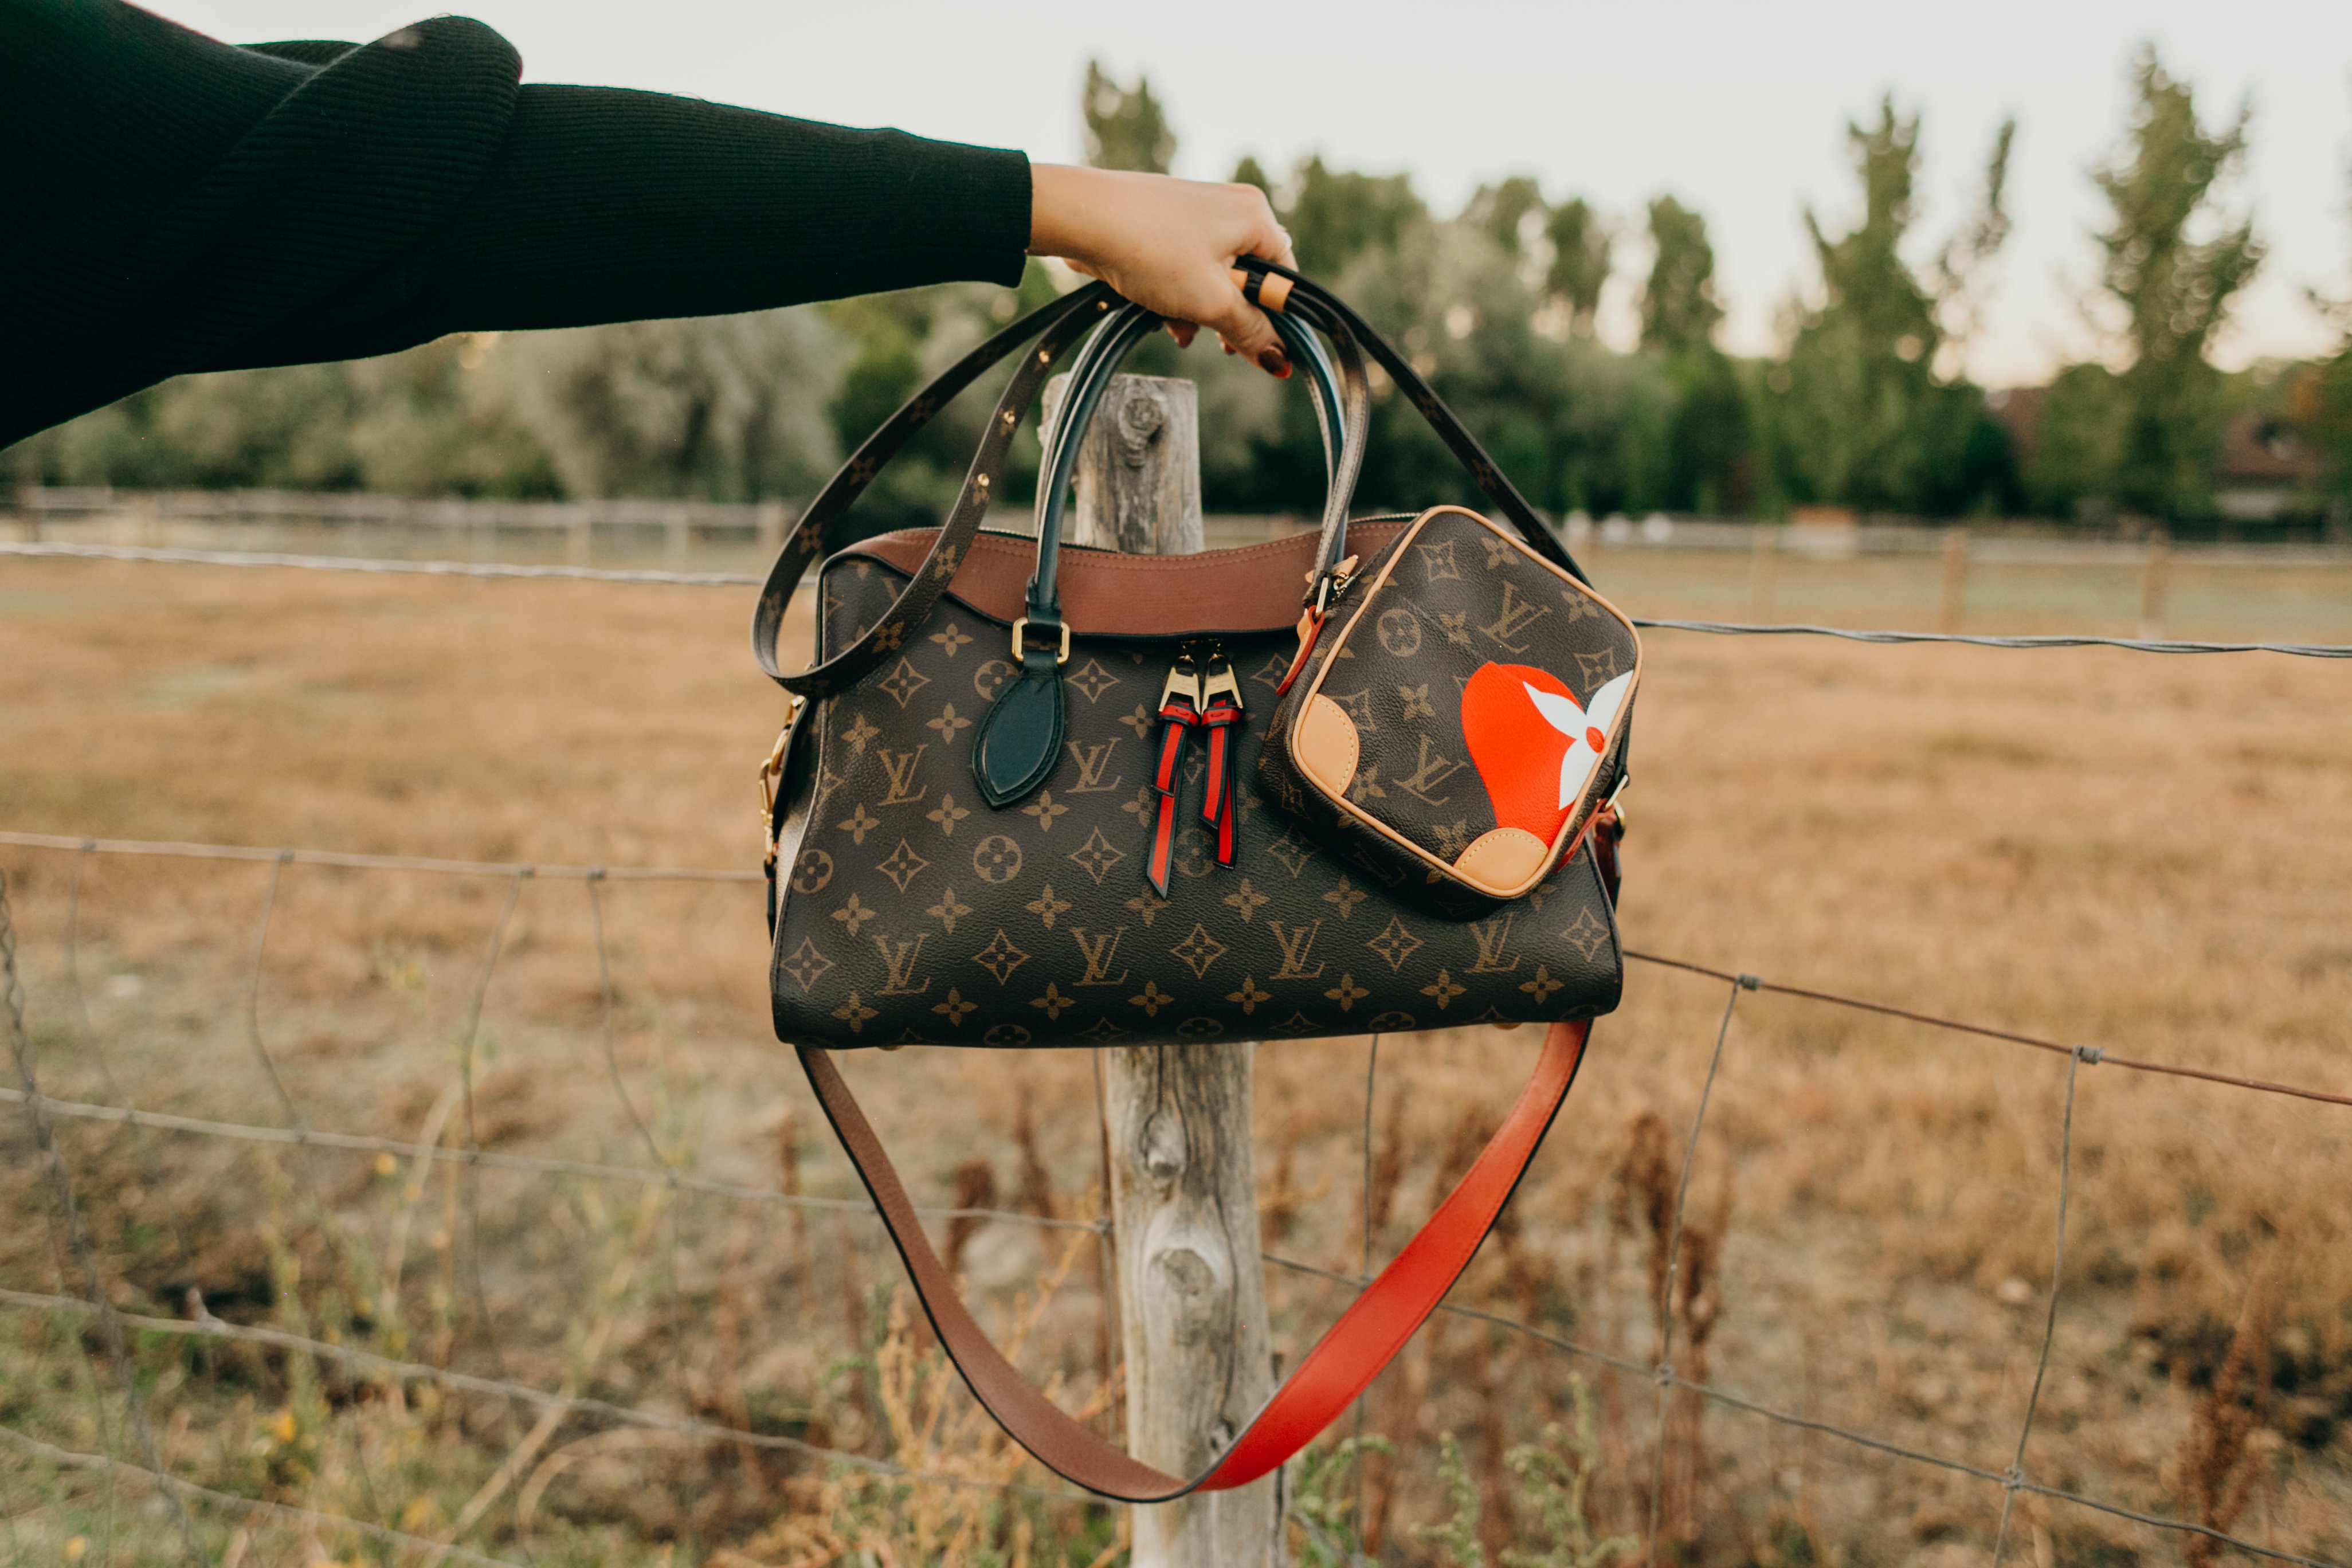 Authenticity – The Lady Bag